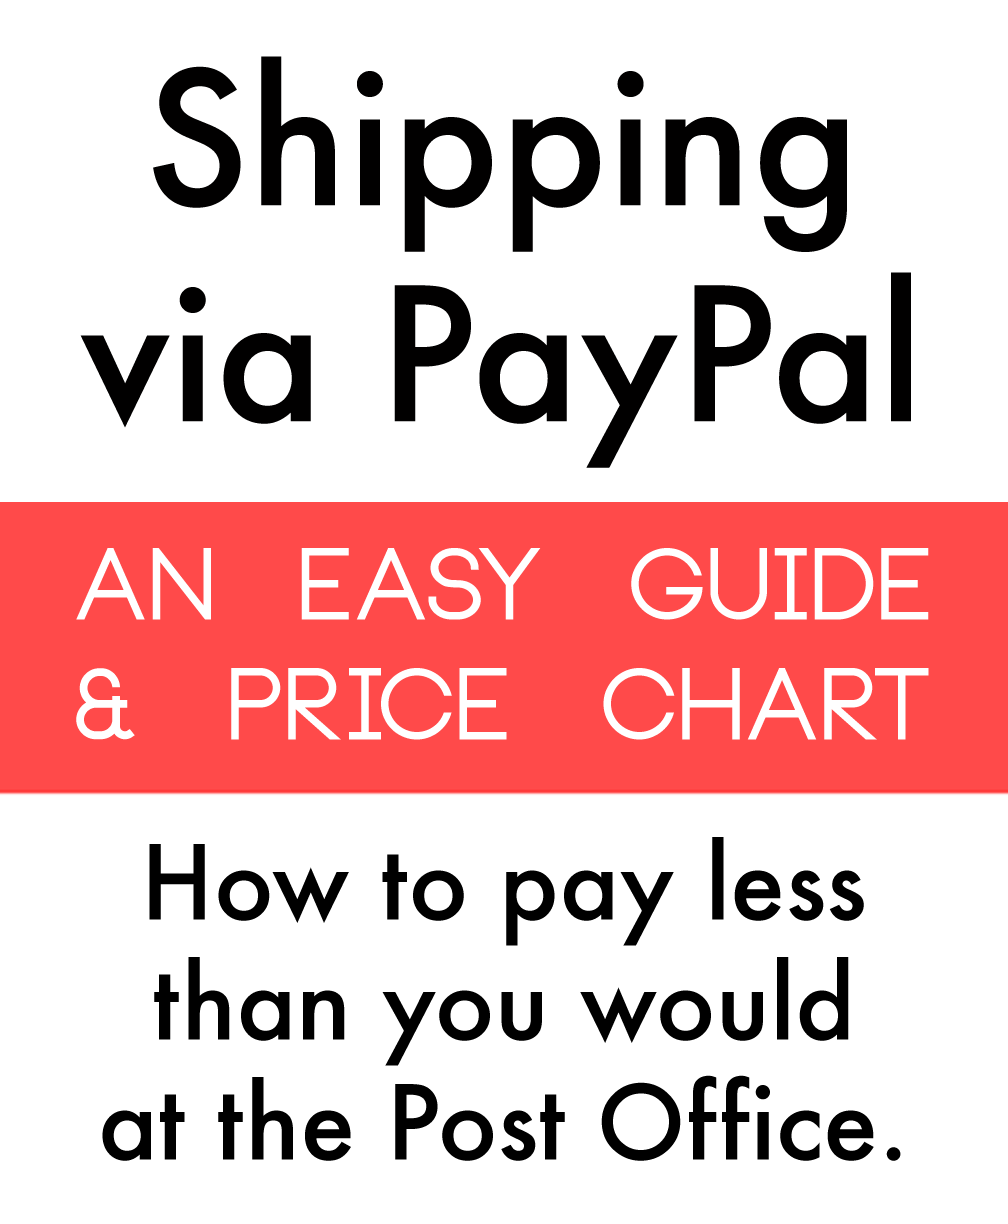 How to Ship on PayPal for Cheaper than the Post Office - A Guide on Oaxacaborn dot com